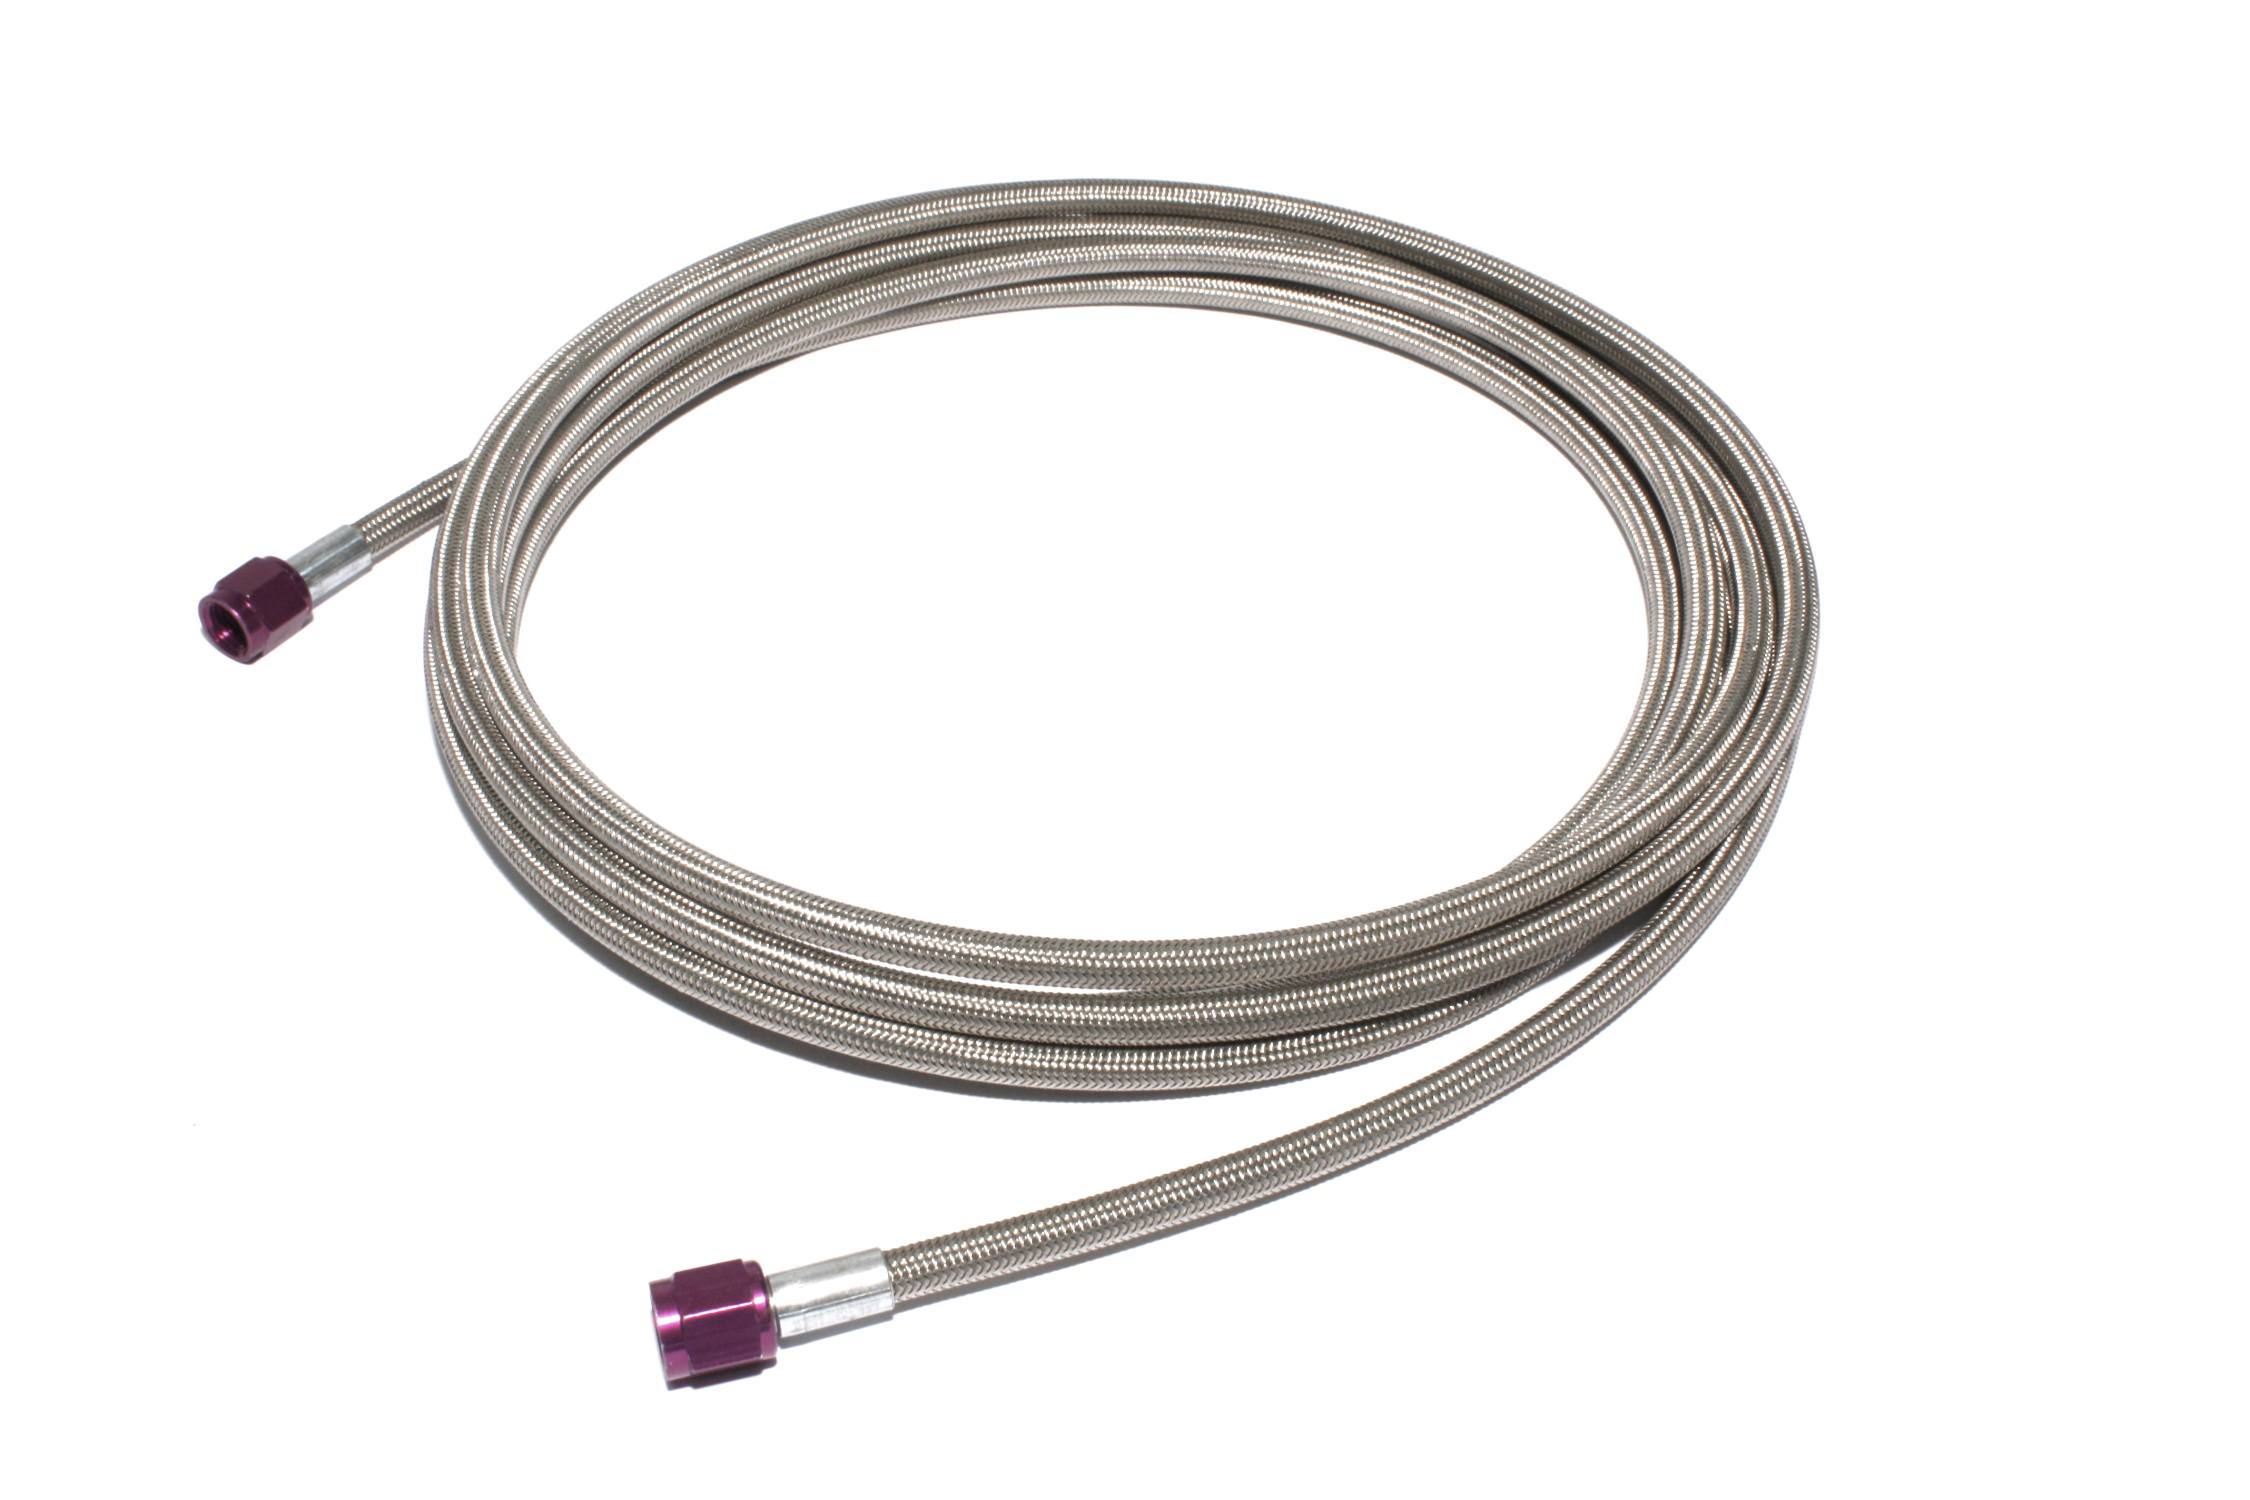 ZEX 16' (ft) Long -4AN Braided Hose with Purple Ends., 4AN 16', Corvette, Camaro and others